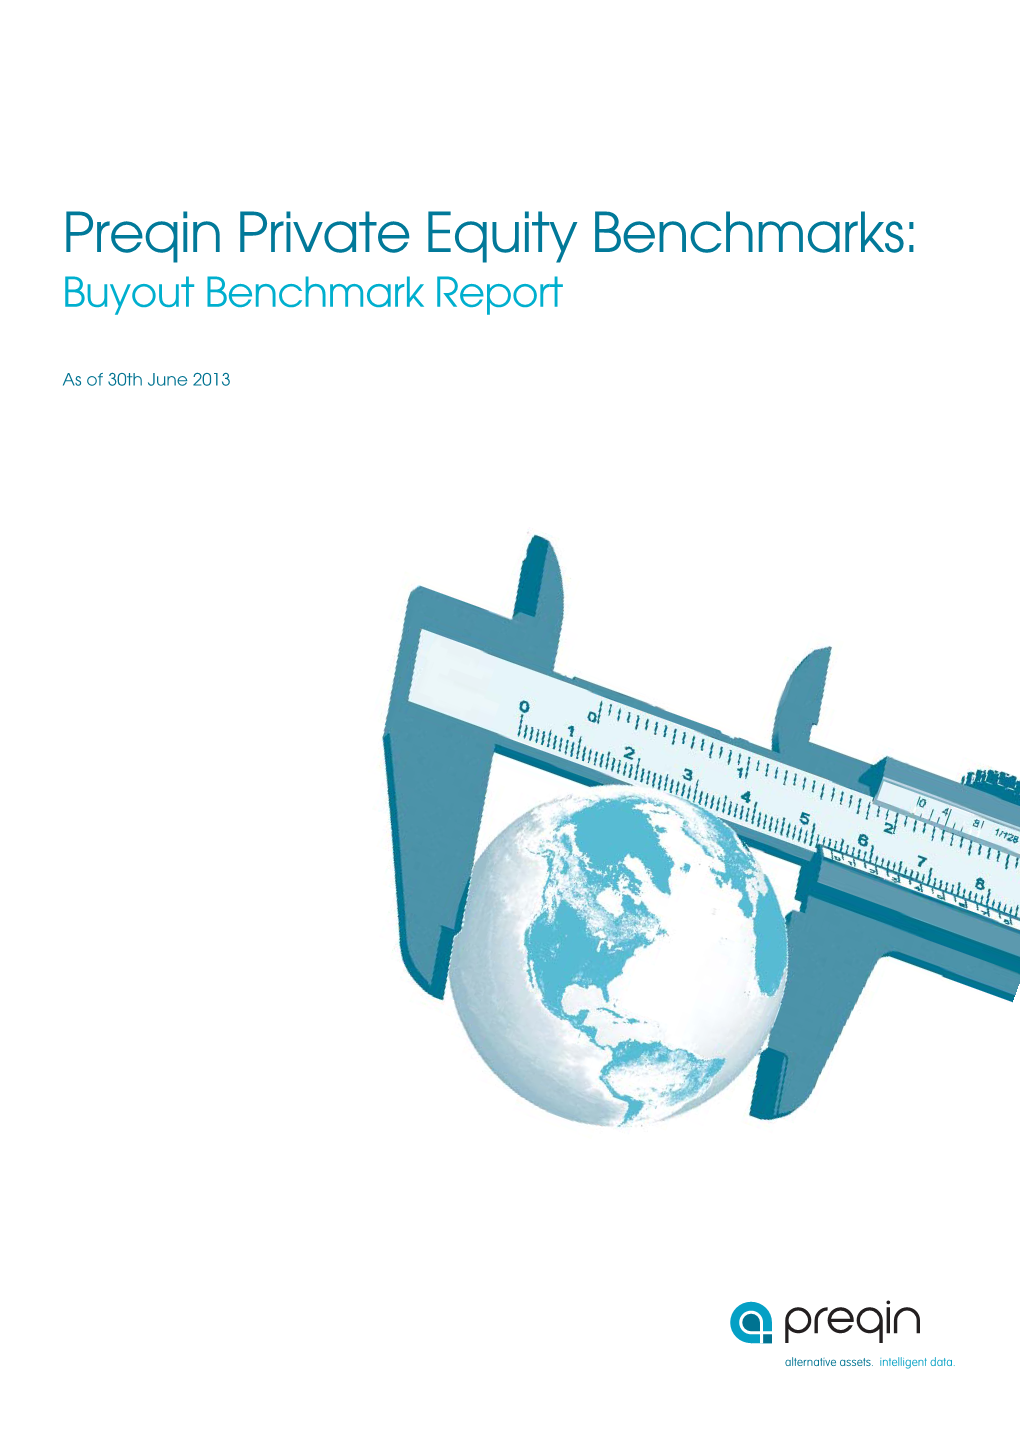 Q2 2013 Preqin Private Equity Benchmarks: Buyout Benchmark Report